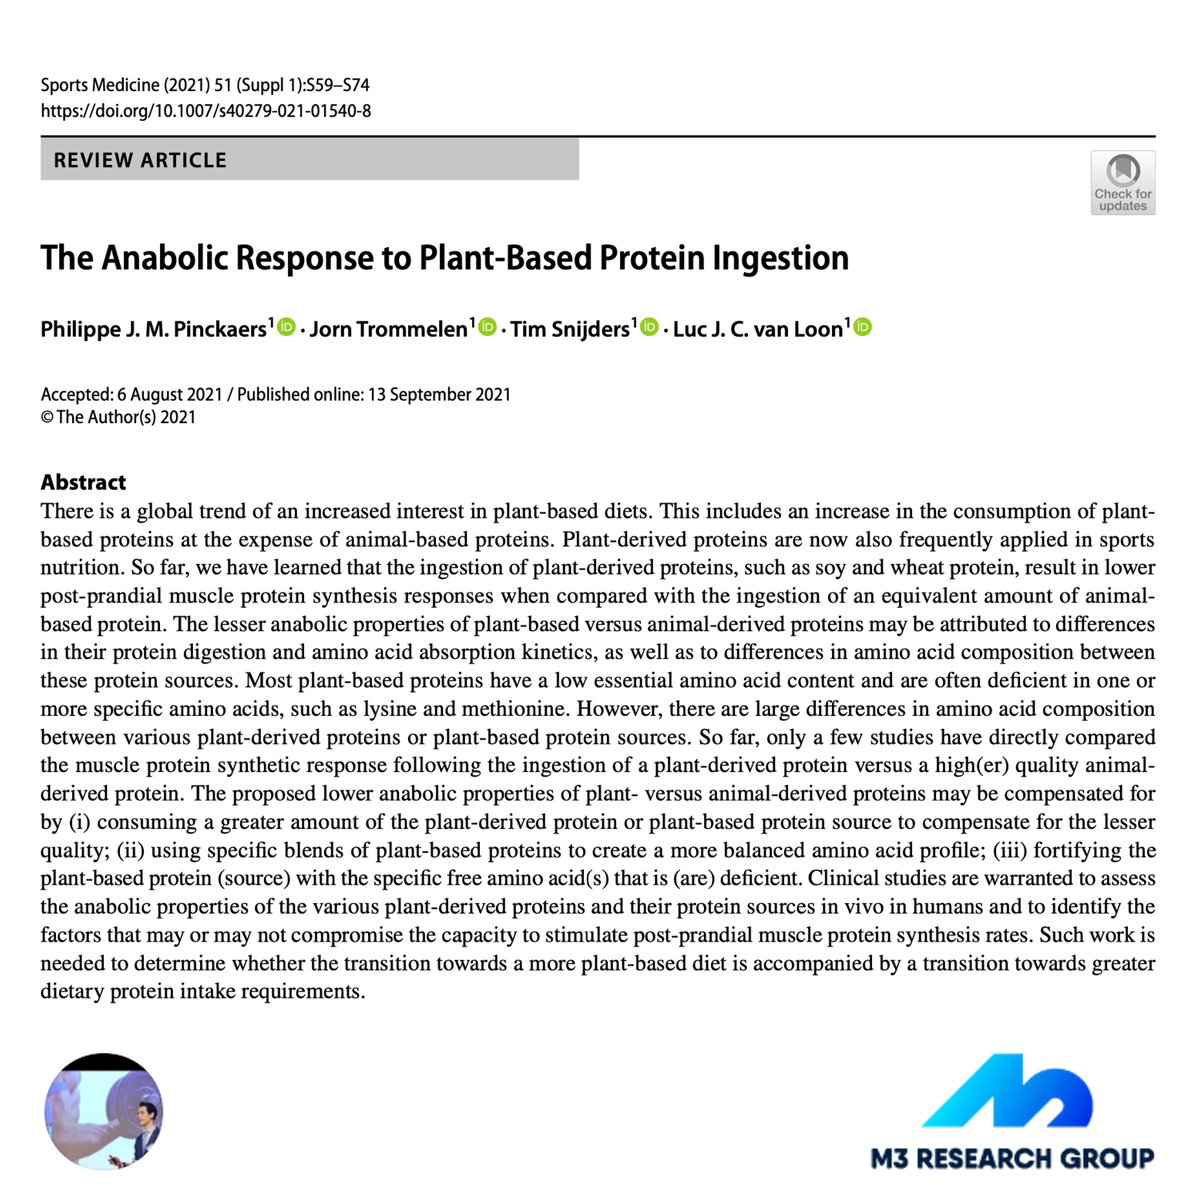 The anabolic response to plant-based protein ingestion

Our 2021 review:
pubmed.ncbi.nlm.nih.gov/34515966/

A thread 🧵👇  

#protein #plantbased #veganbodybuilding